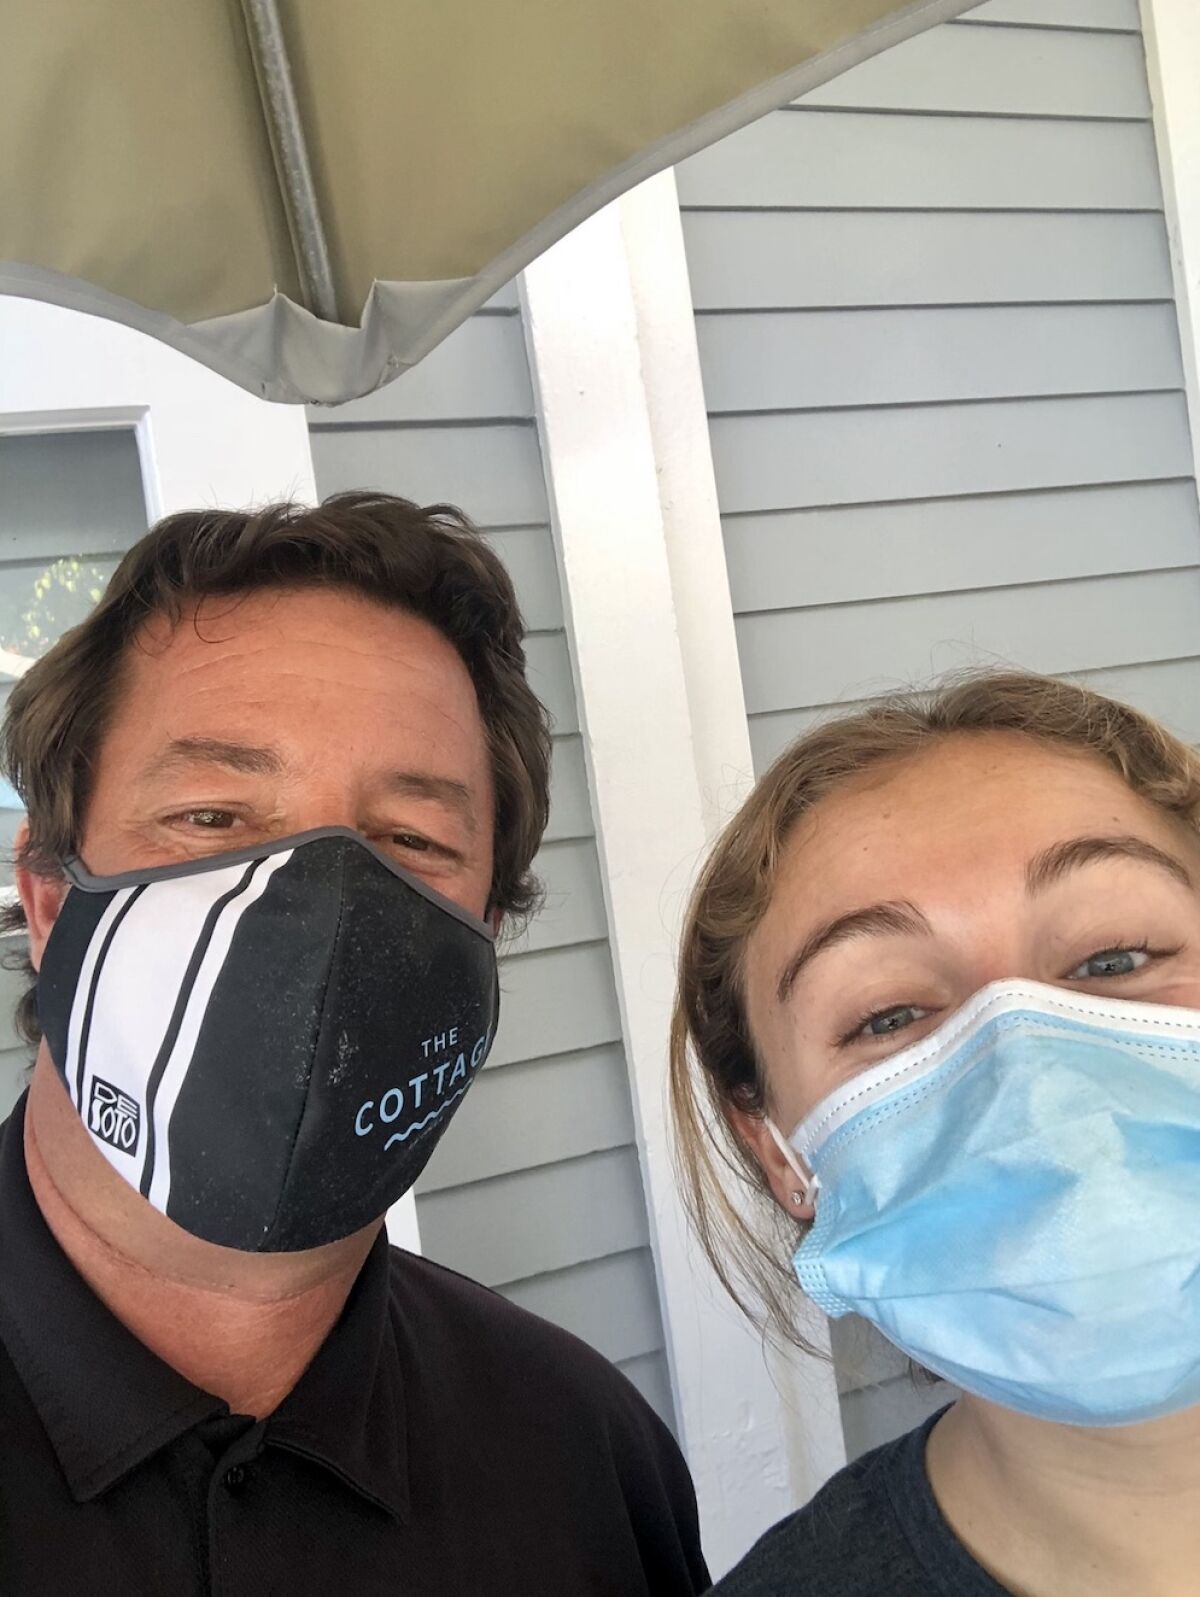 Wearing masks will be optional for staff and guests at The Cottage restaurant in La Jolla starting June 15.